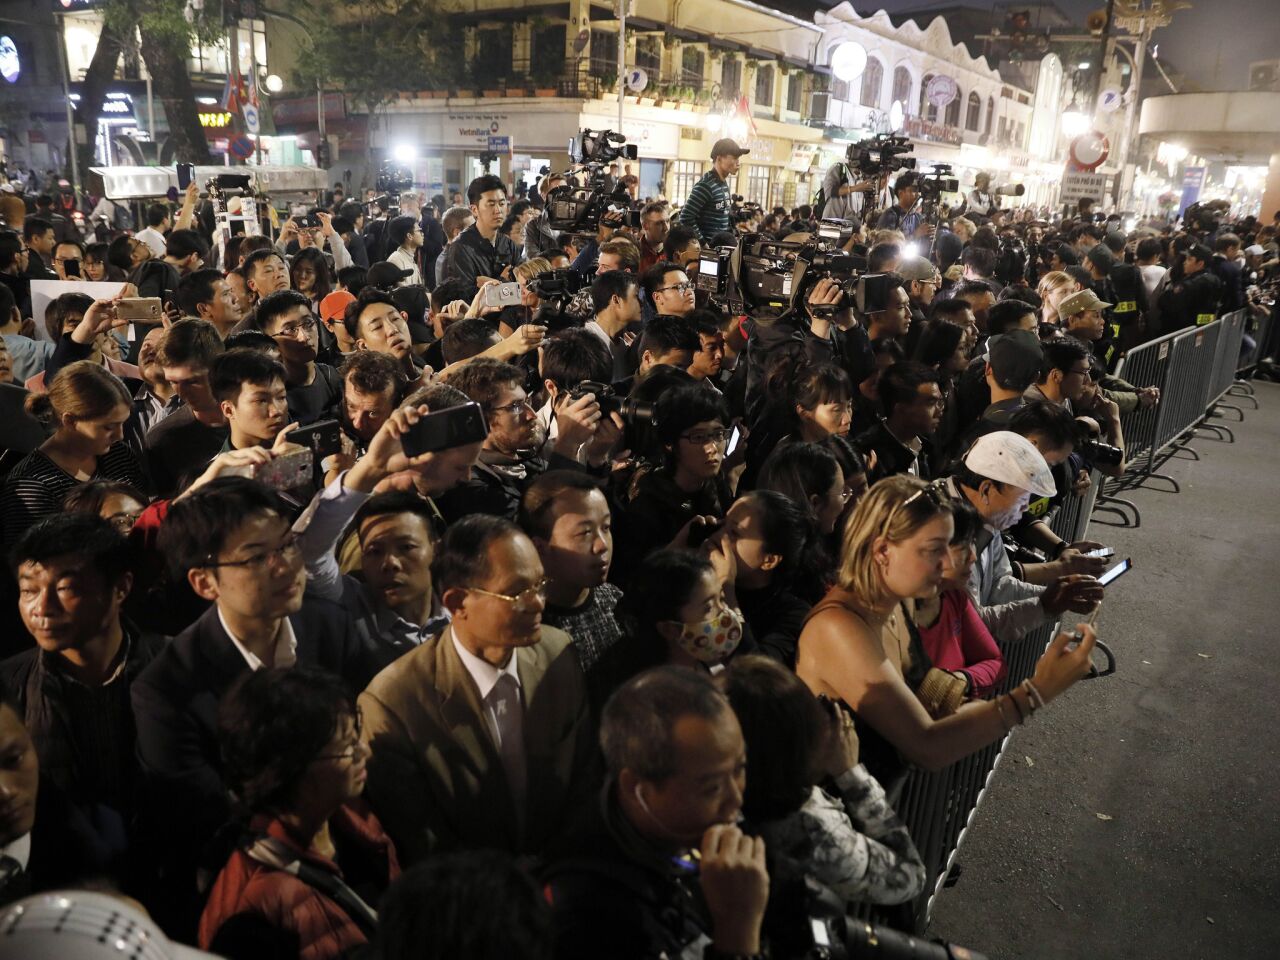 Crowds gather on the streets near the Sofitel Legend Metropole hotel in Hanoi as they wait for President Trump and North Korean leader Kim Jong Un.